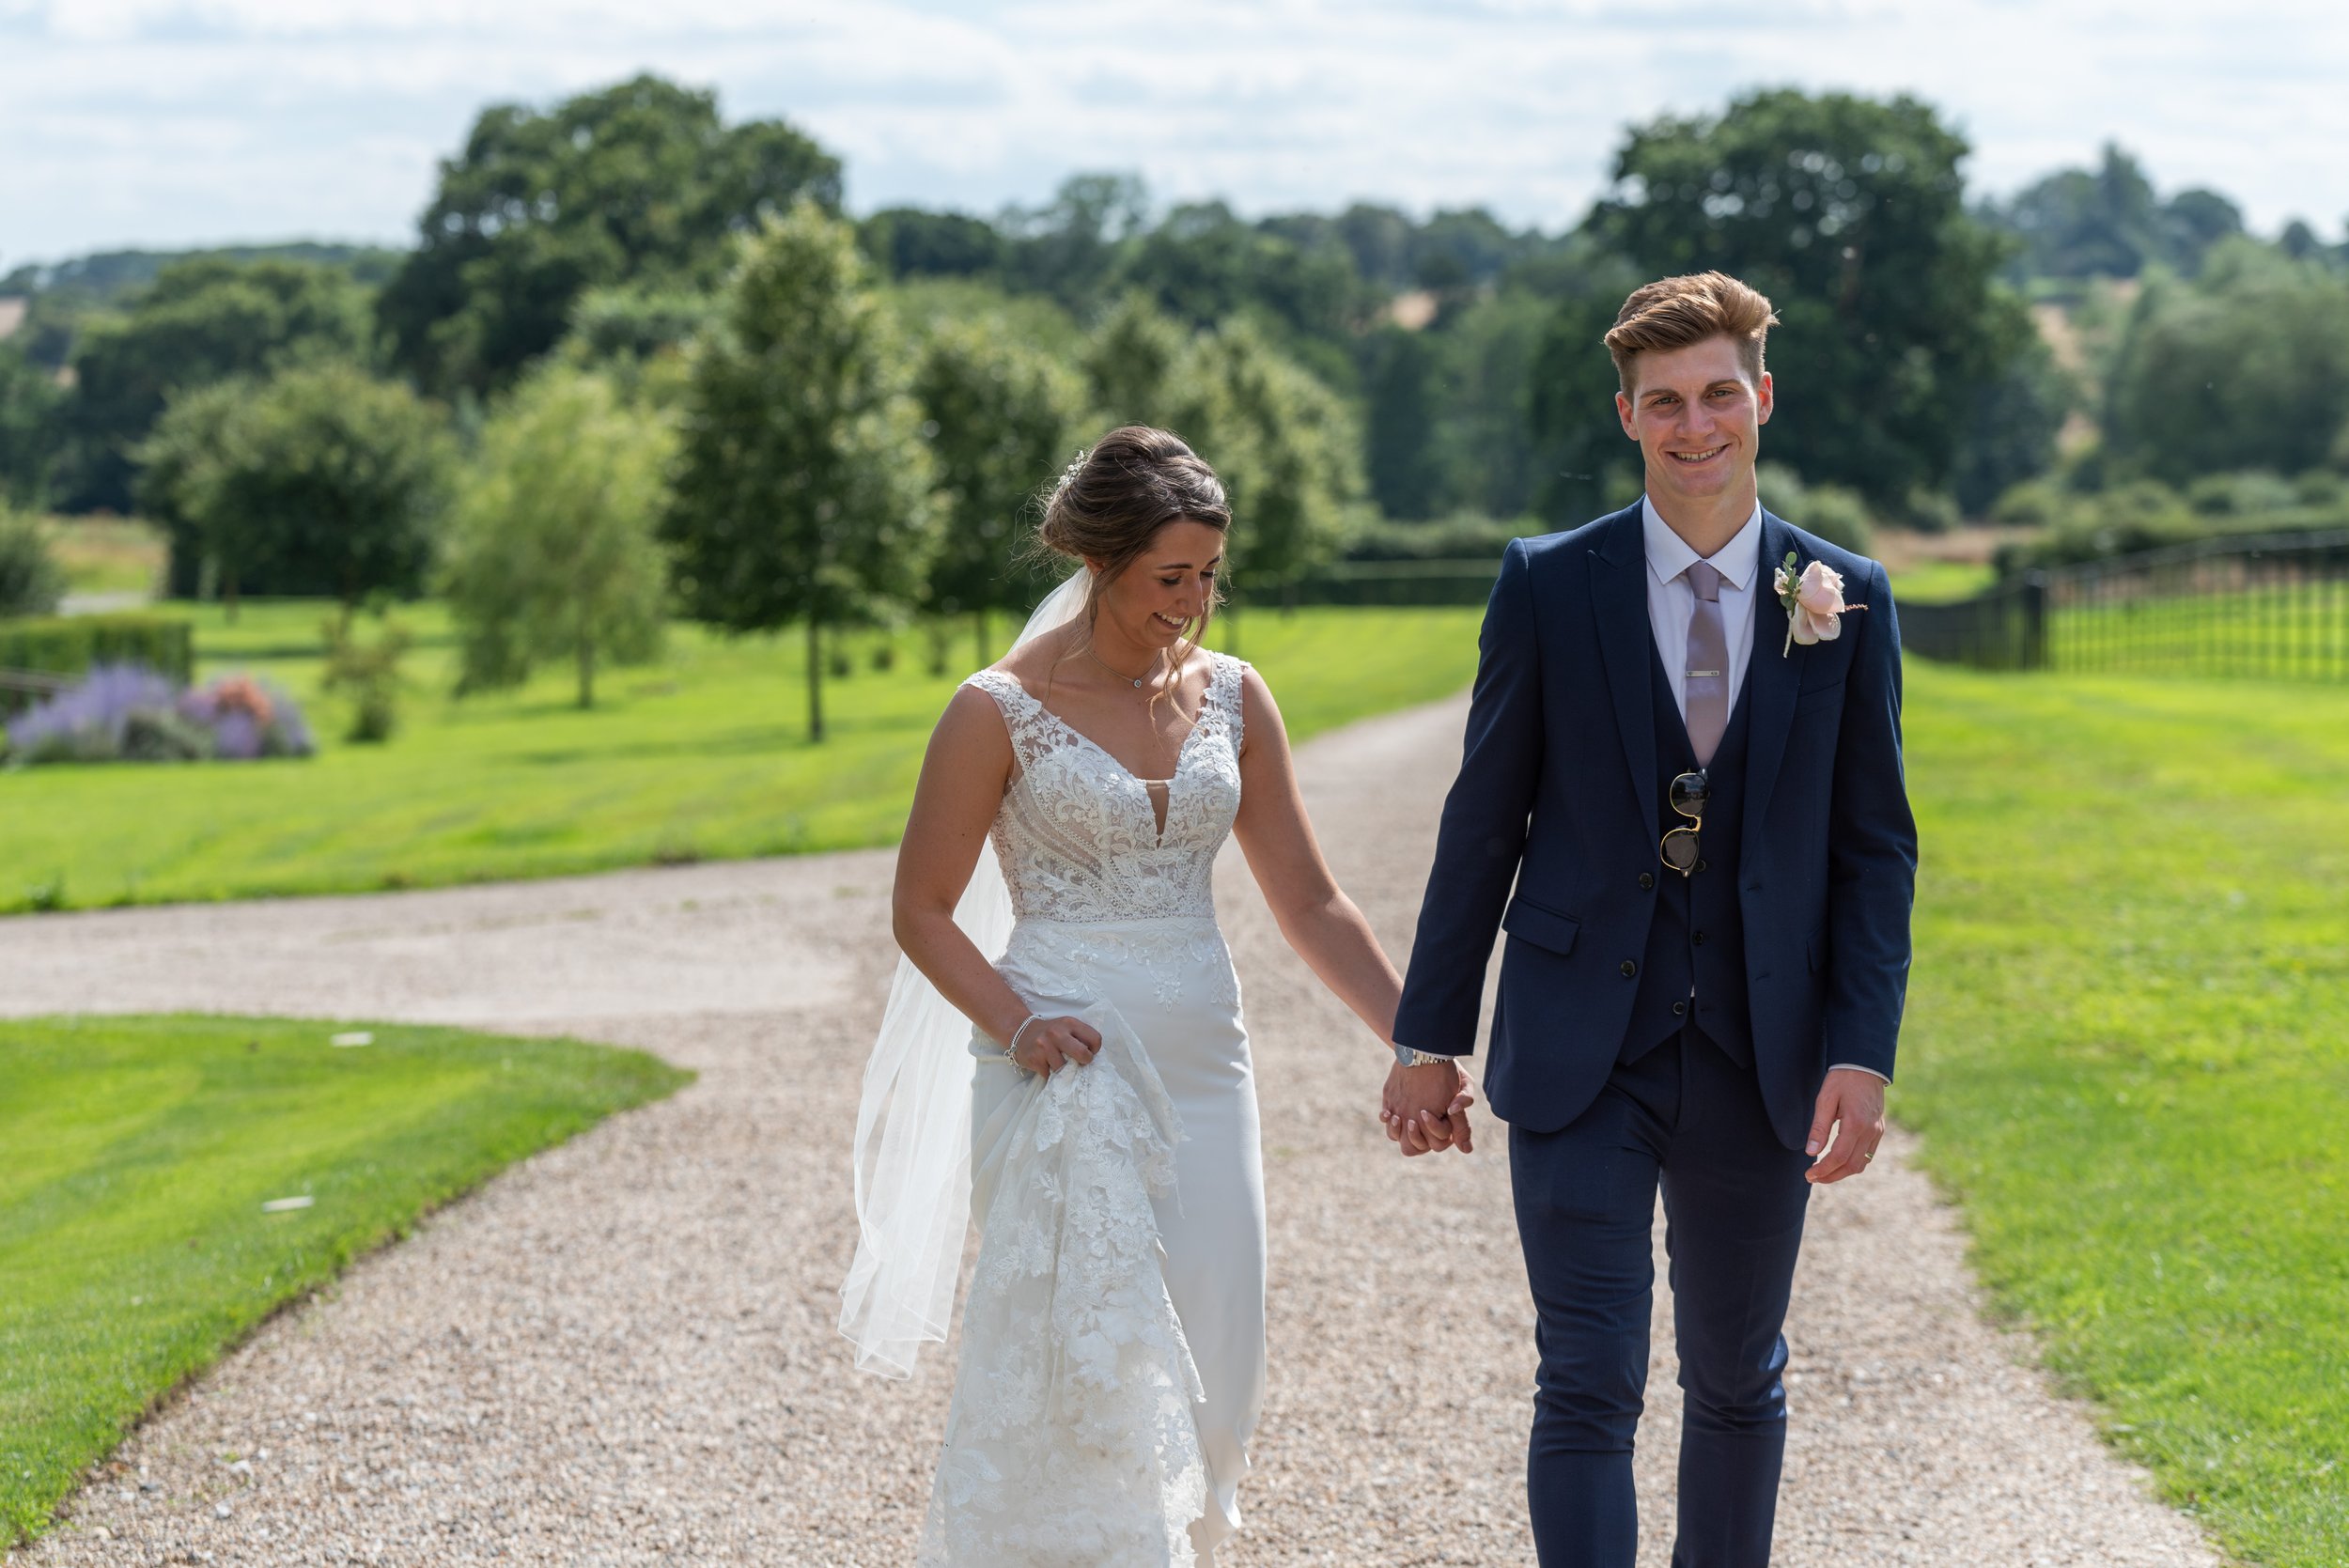  bride and groom walking in grounds at wedding venue 